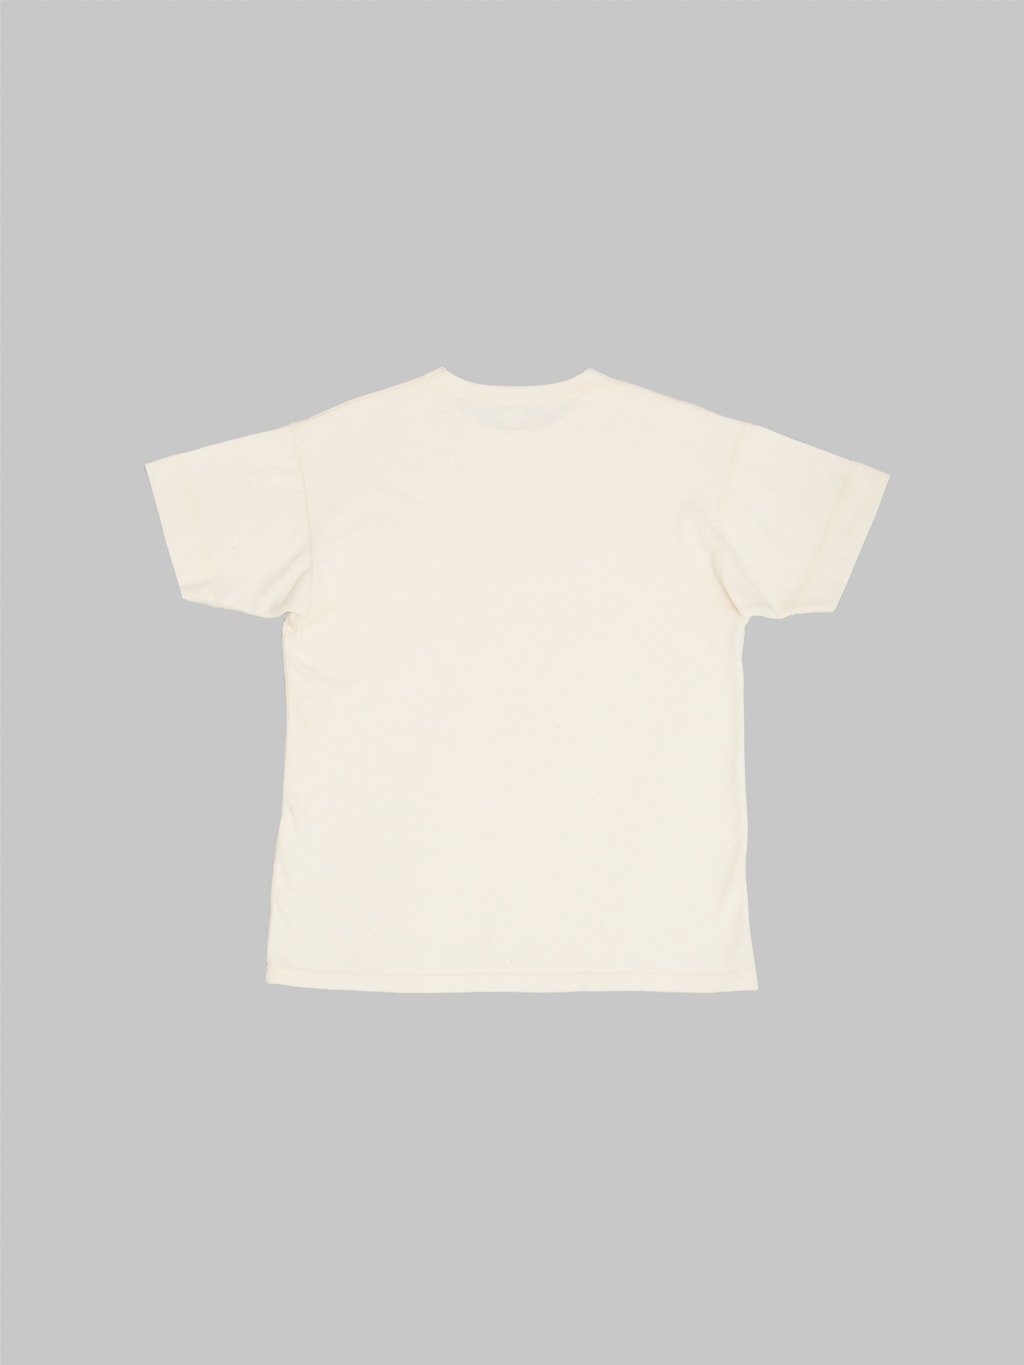 Trophy Clothing Utility Mil Tee natural back